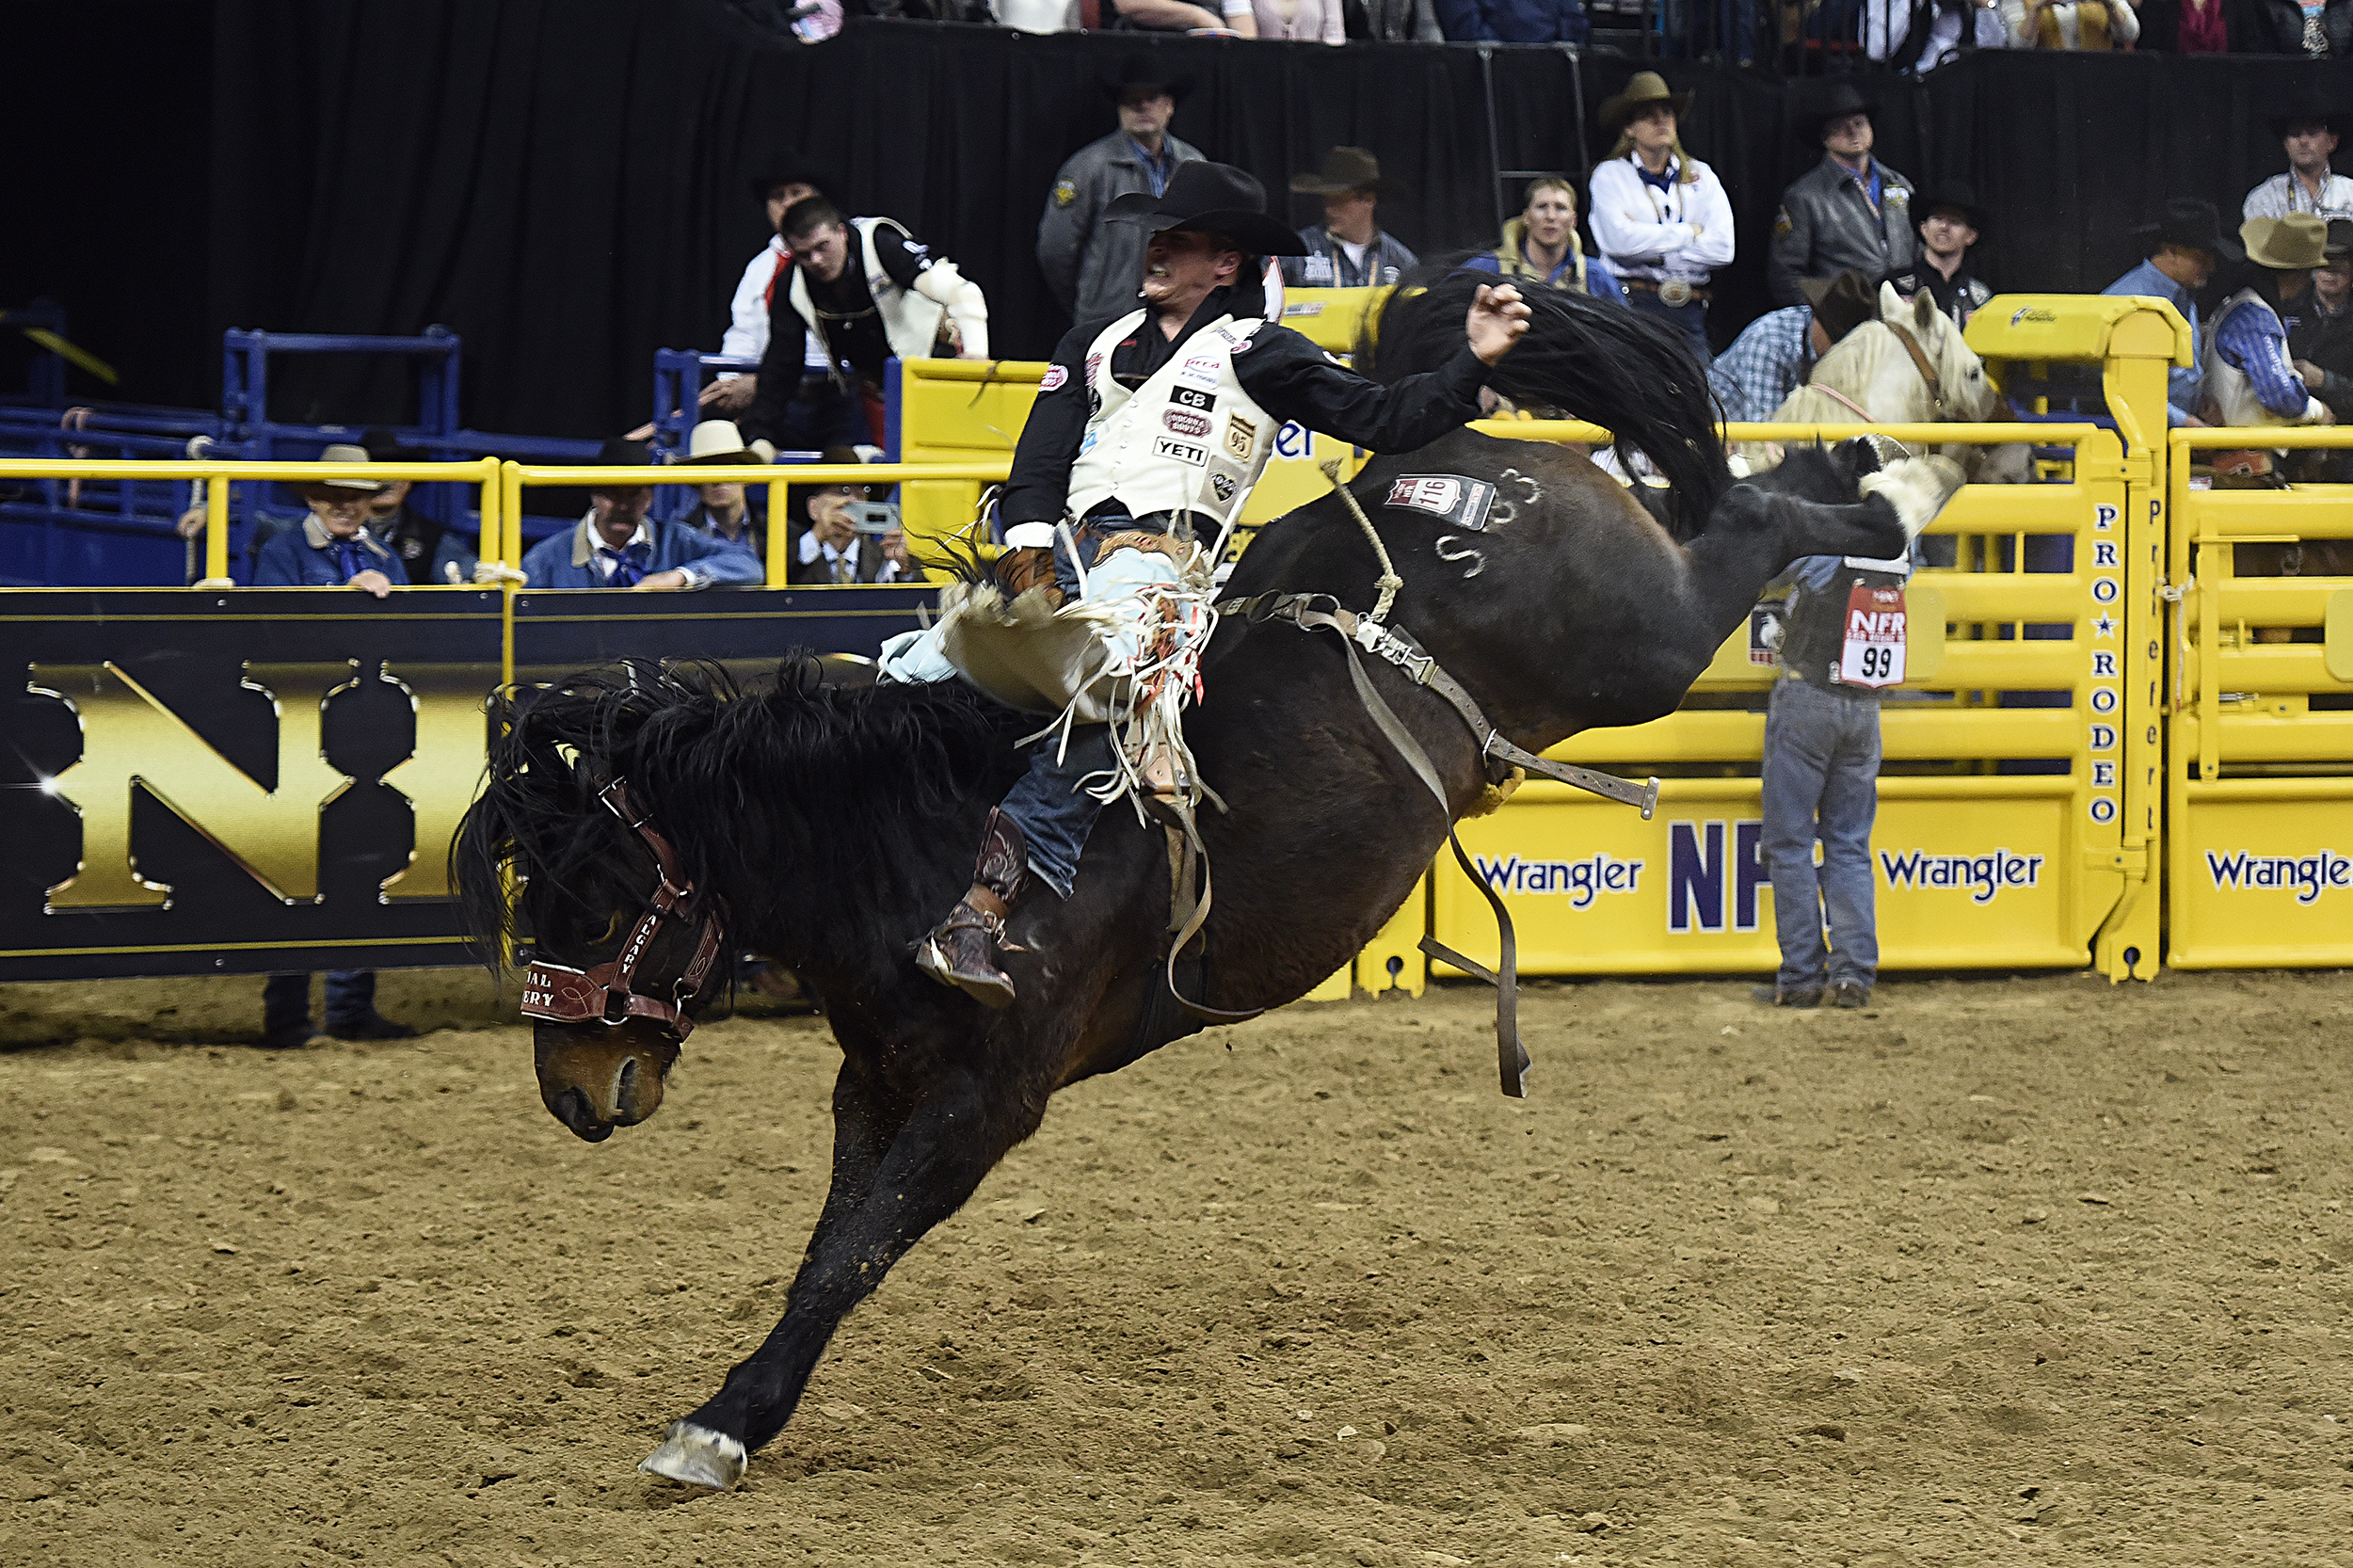 Richmond Champion rides Calgary Stampede's Special Delivery during Saturday's third round at the National Finals Rodeo for 83.5 points to place for the first time at this year's championship. (PHOTO BY ROBBY FREEMAN)